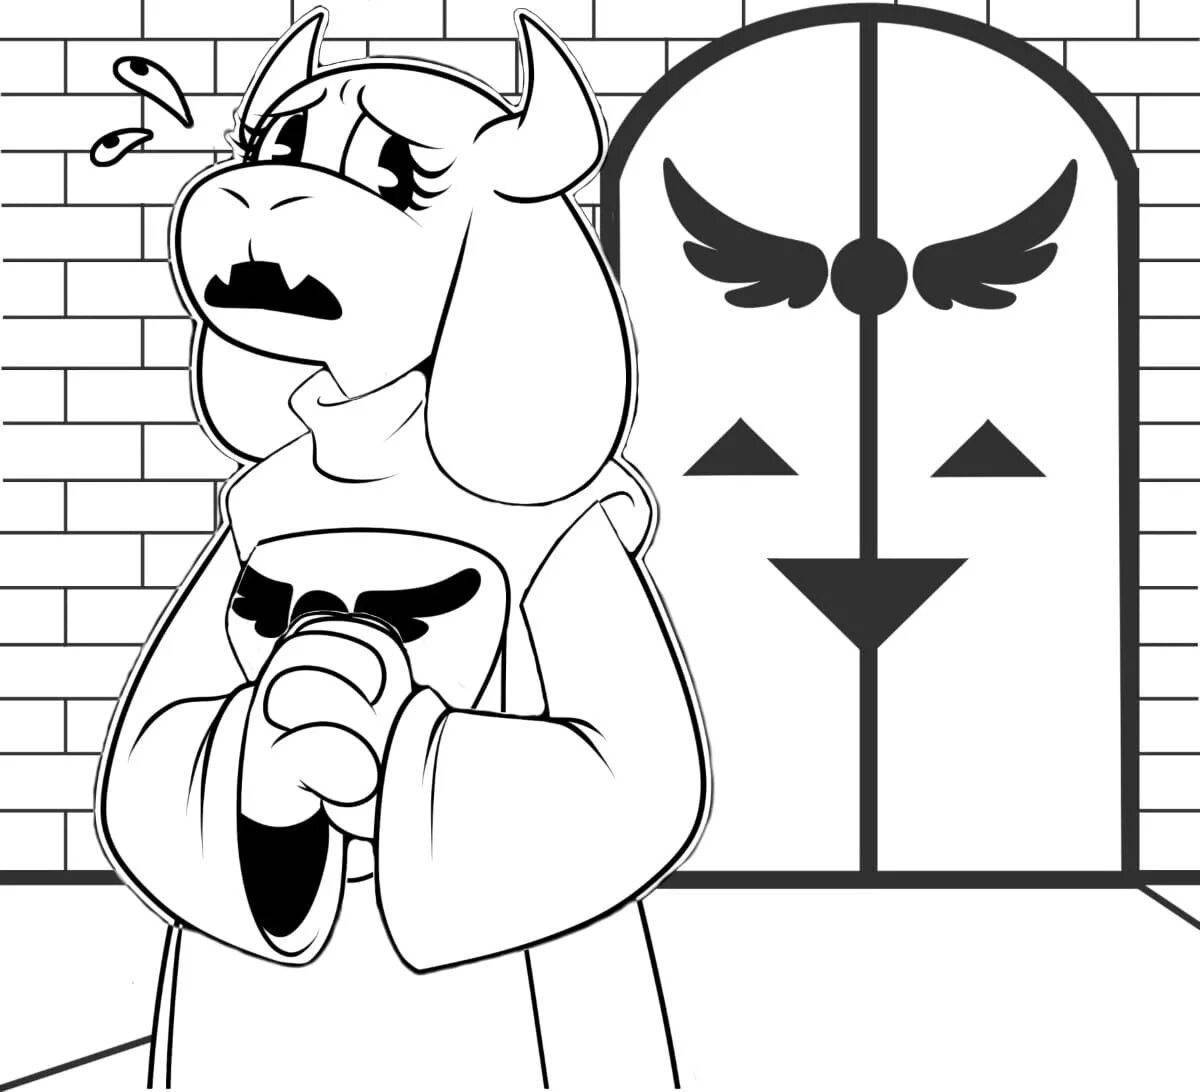 Playful othertale coloring page